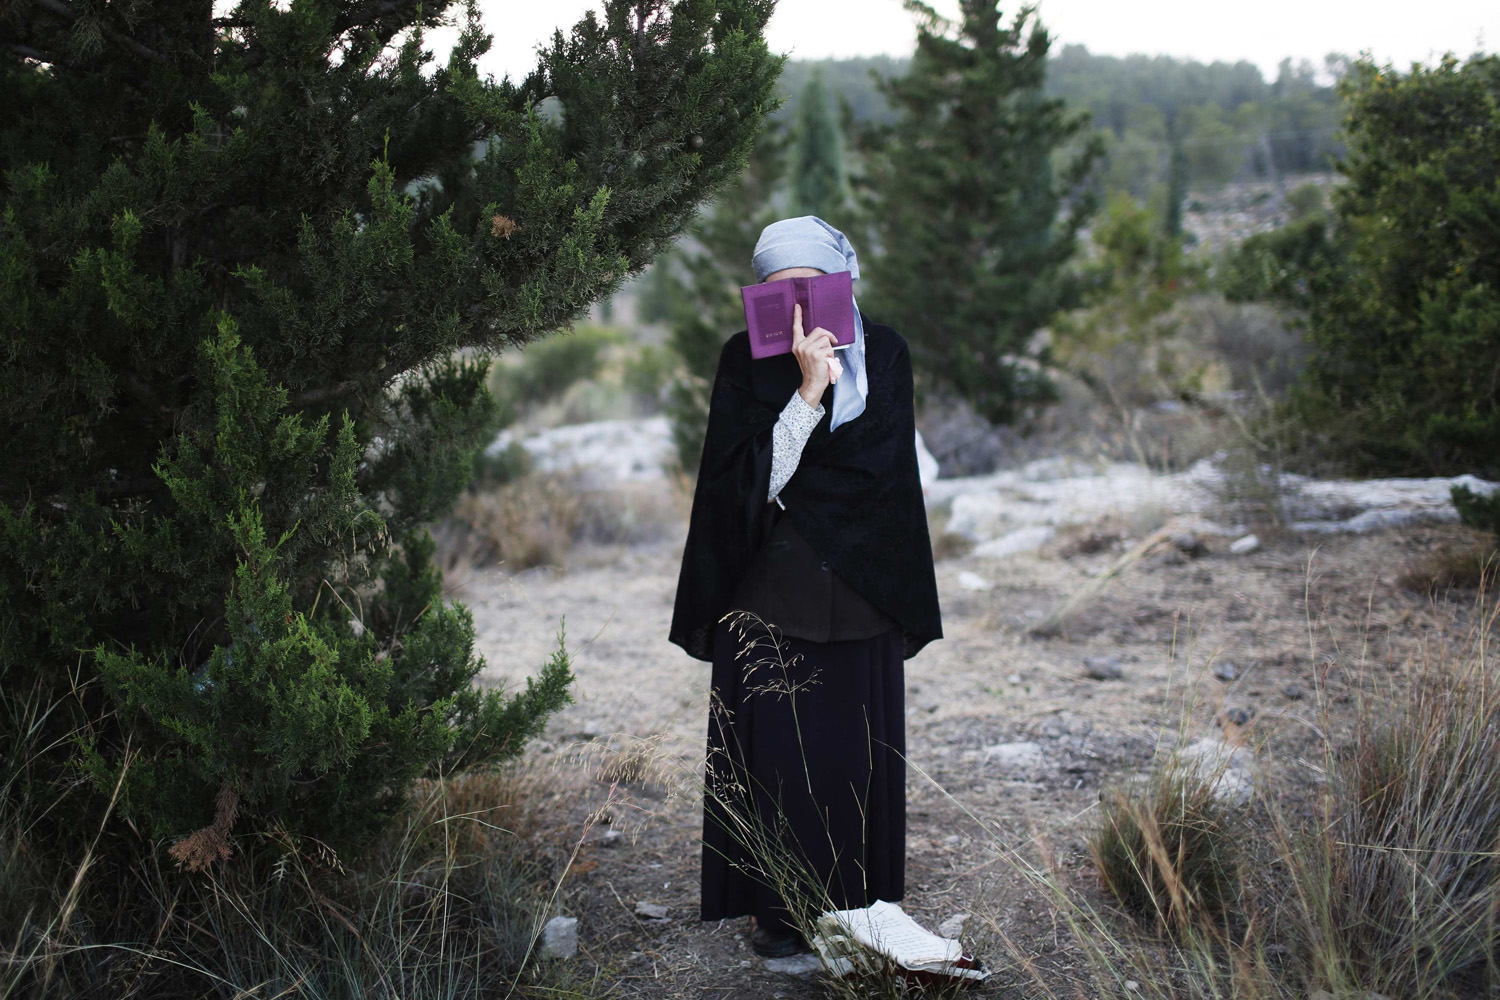 Jul. 1, 2014. A Jewish woman prays during the joint funeral of the three Israeli teens who were abducted and killed in the occupied West Bank, in the Israeli city of Modi'in.